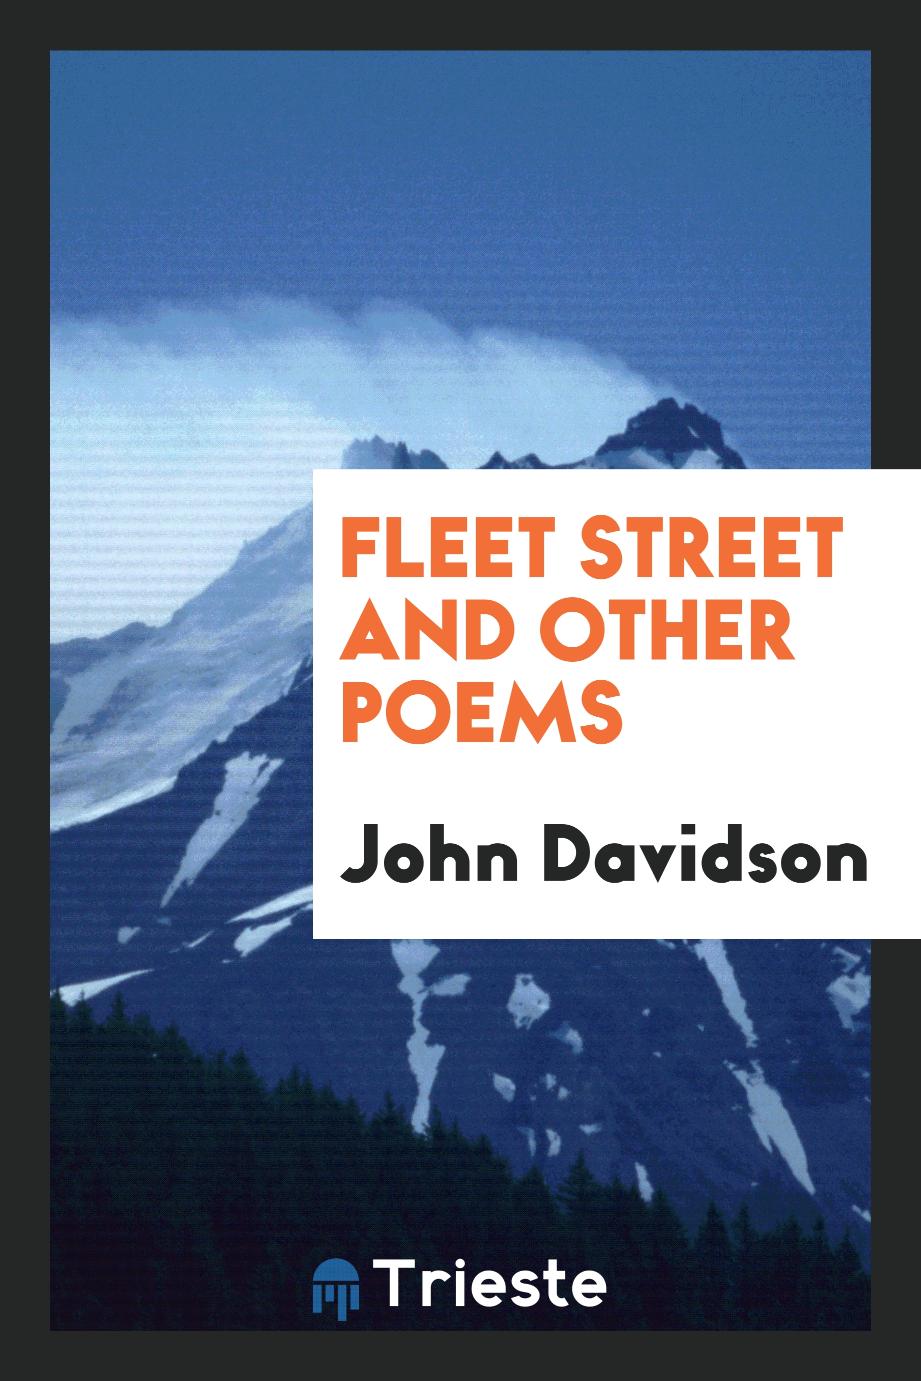 Fleet Street and Other Poems